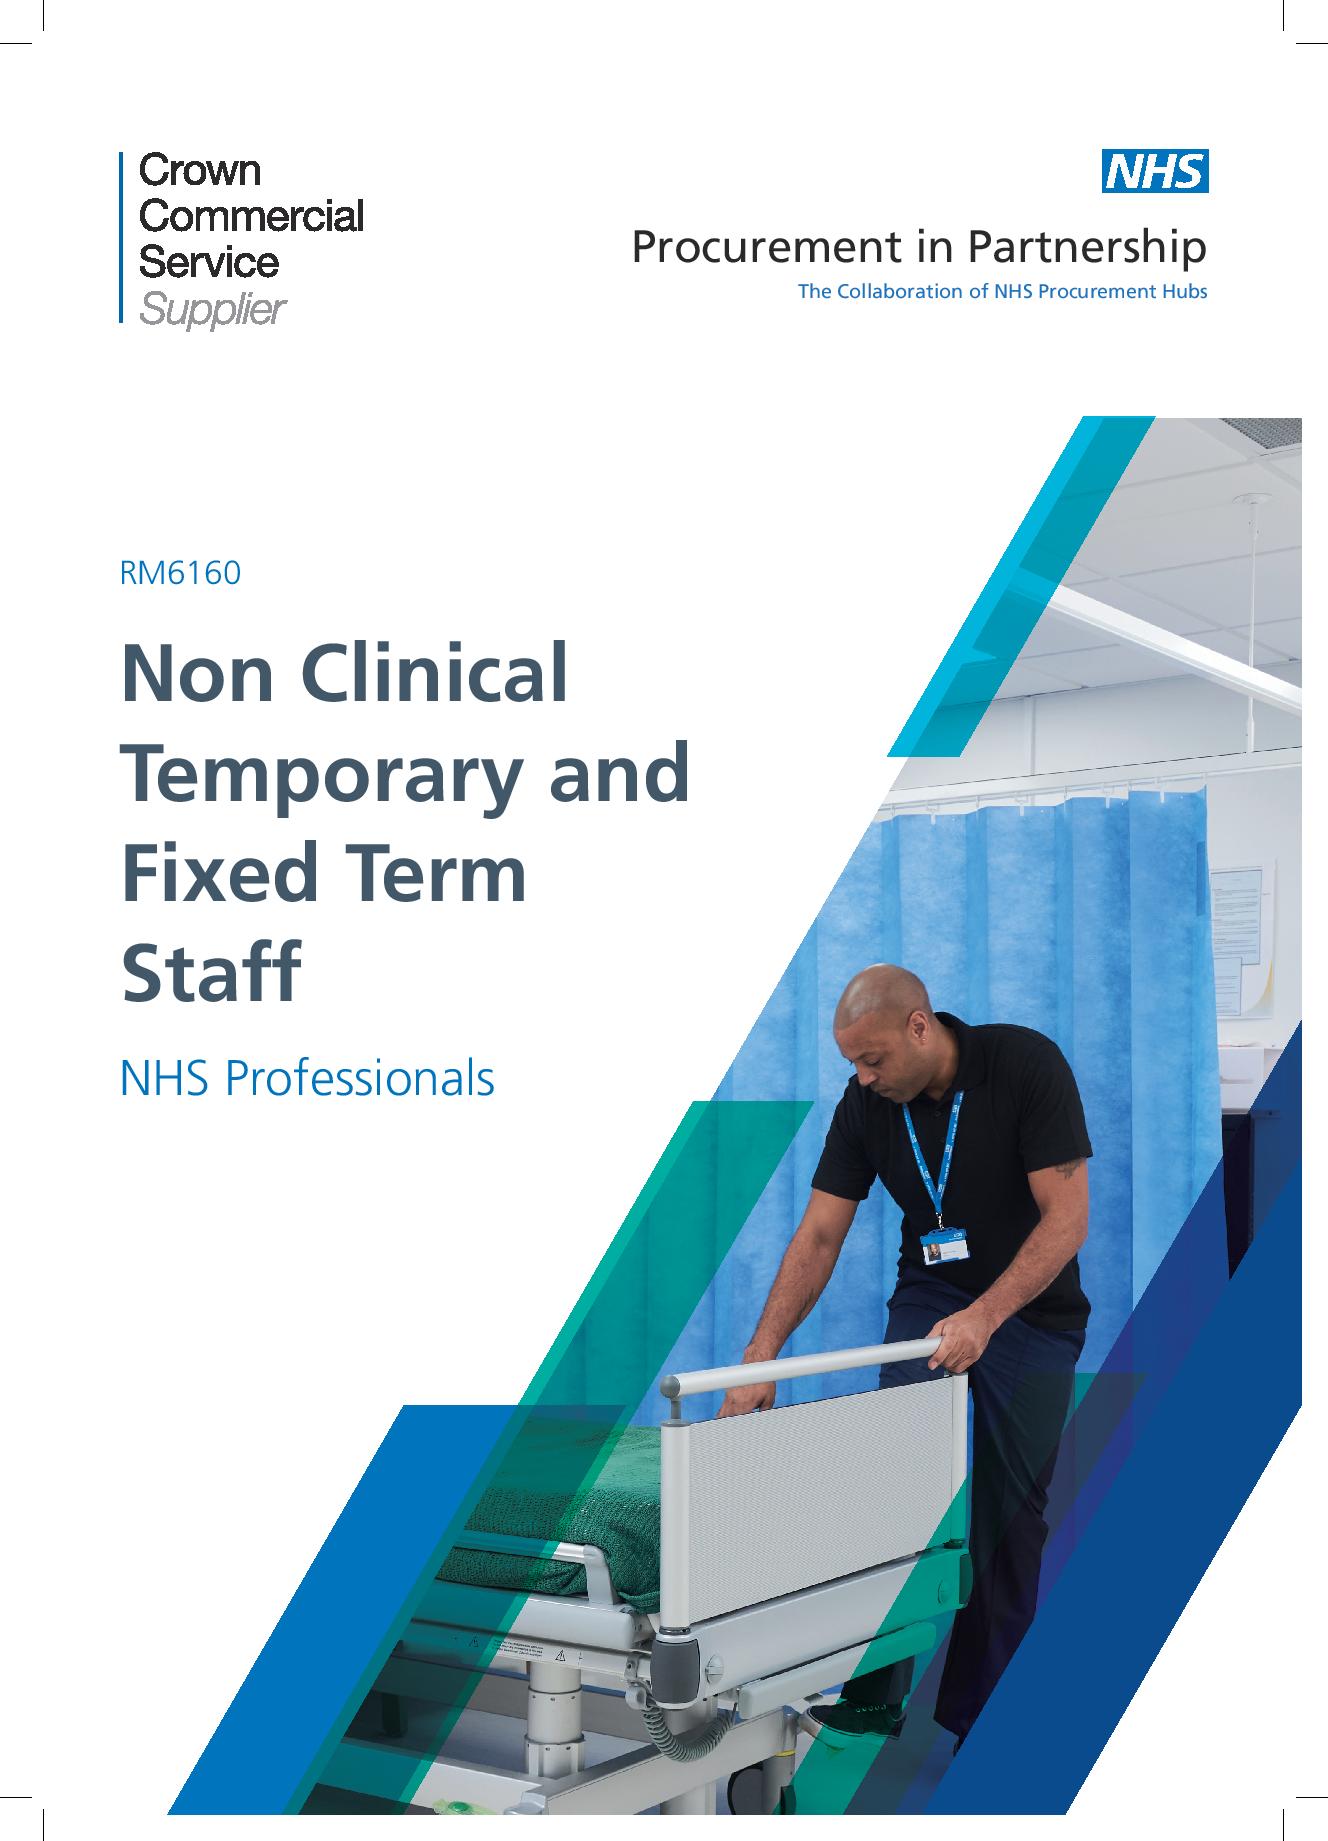 Non Clinical temporary and fixed term staff